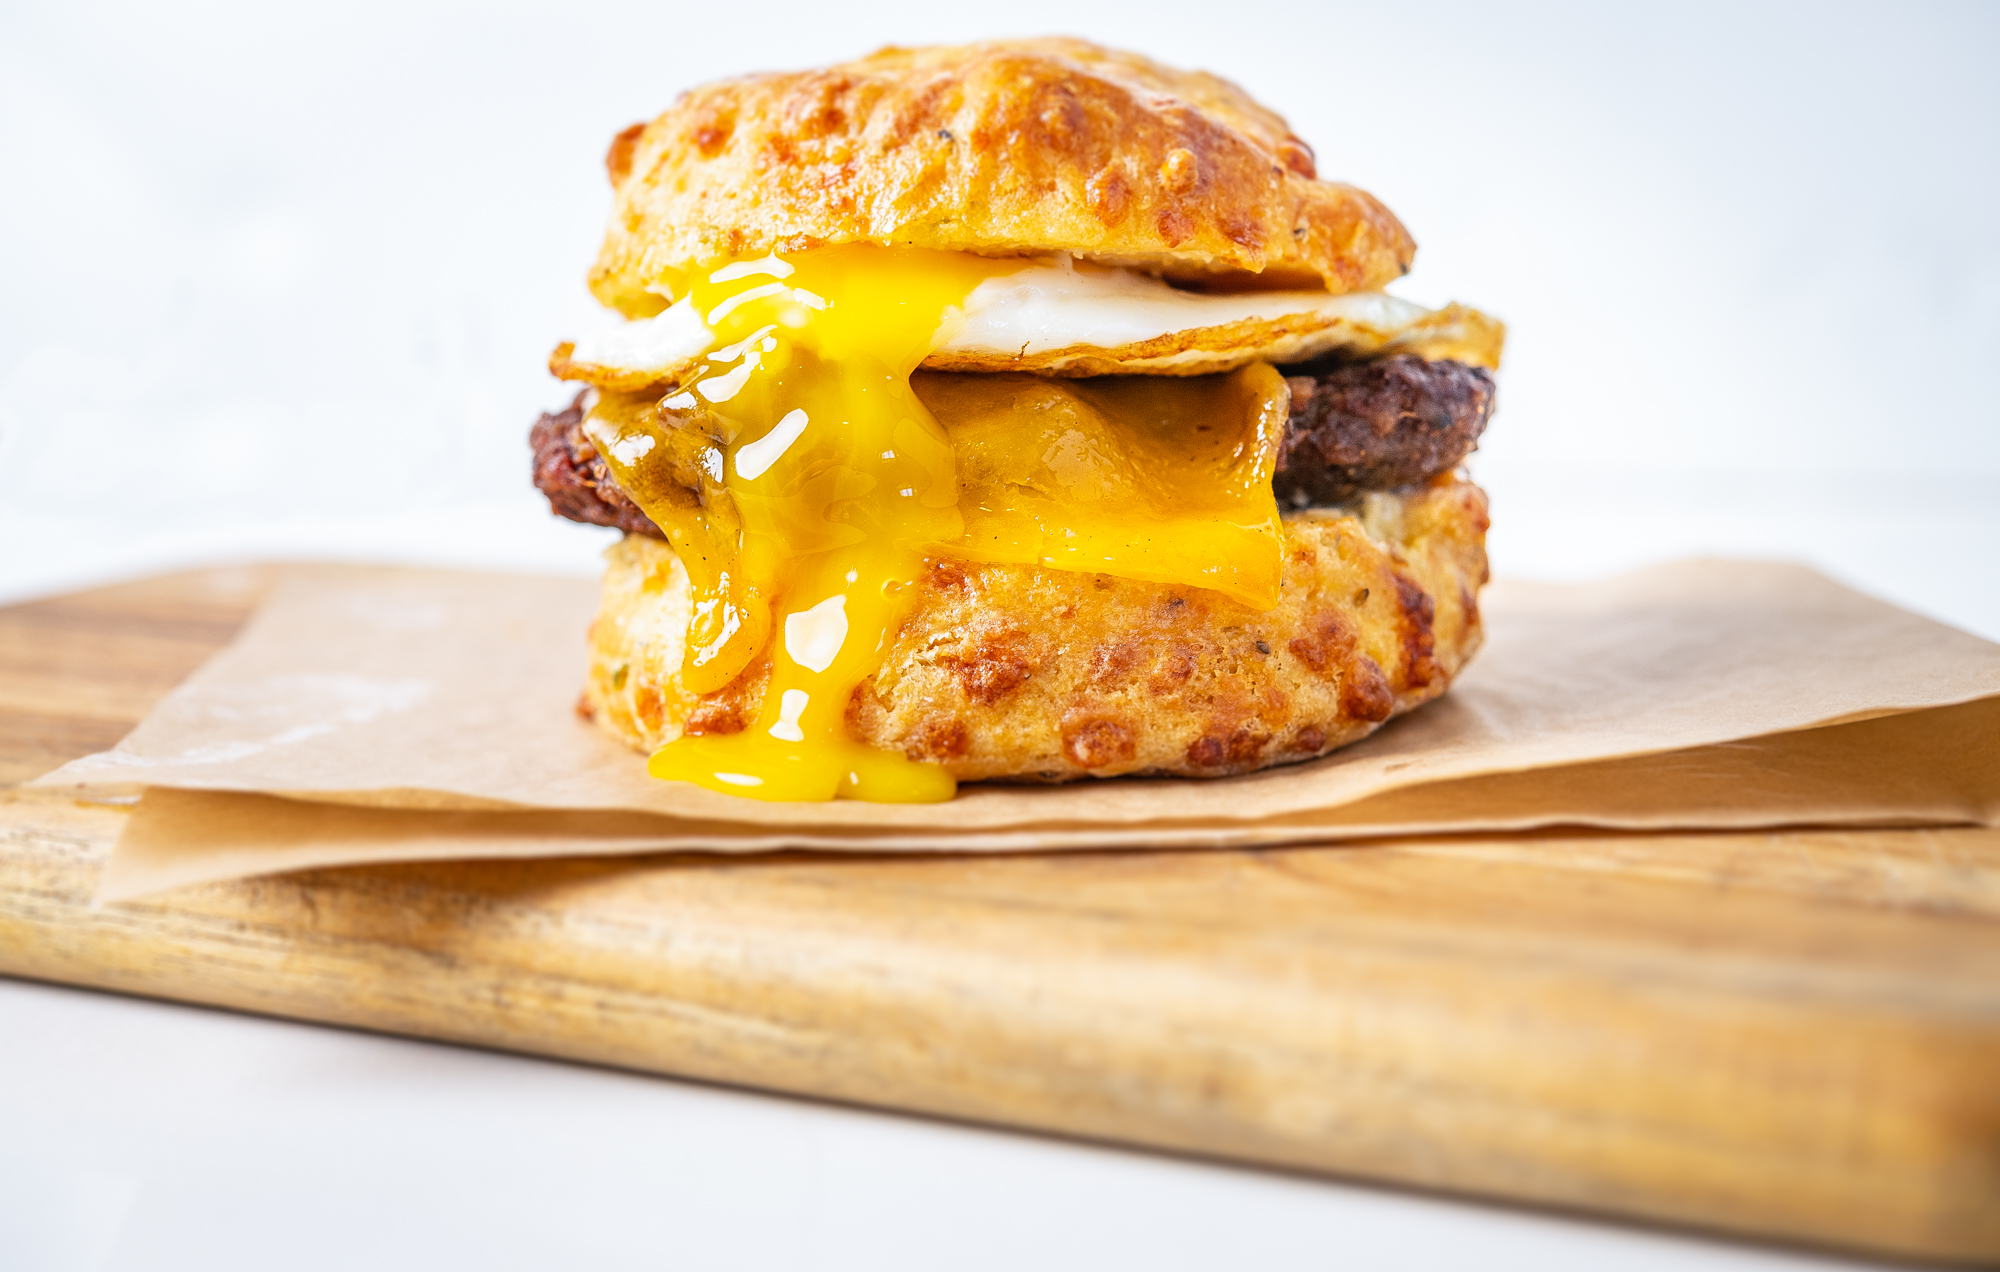 An egg sandwich with sausage oozes yolk onto a cheesy biscuit by Ghost Dog Egg Man